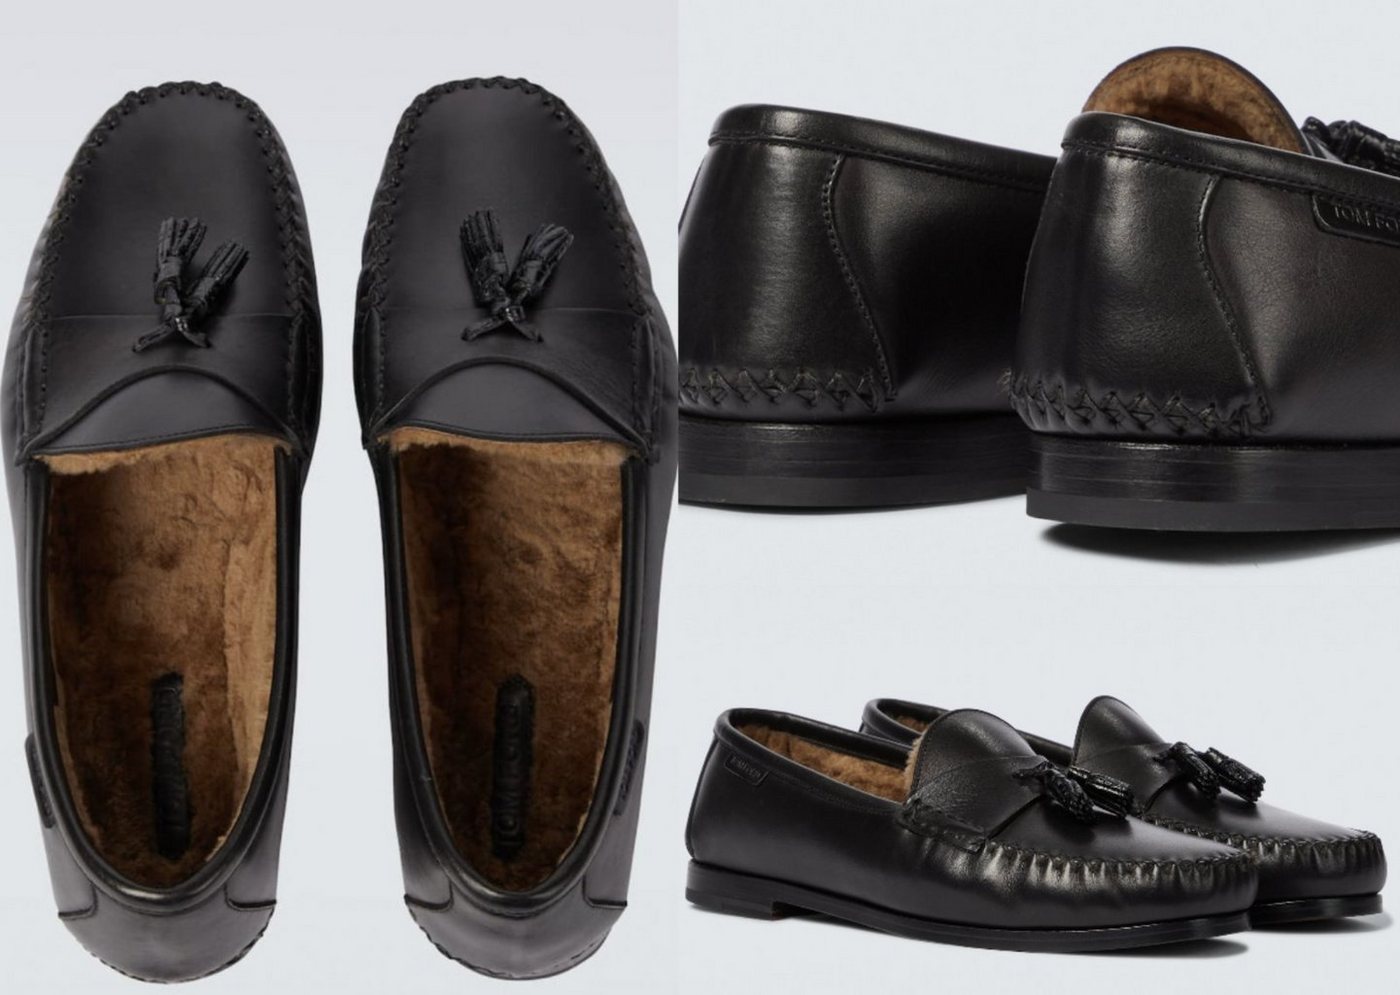 Tom Ford TOM FORD Iconic Tassel Loafers Schuhe Shearling Shoes Mokassin Sl Sneaker von Tom Ford